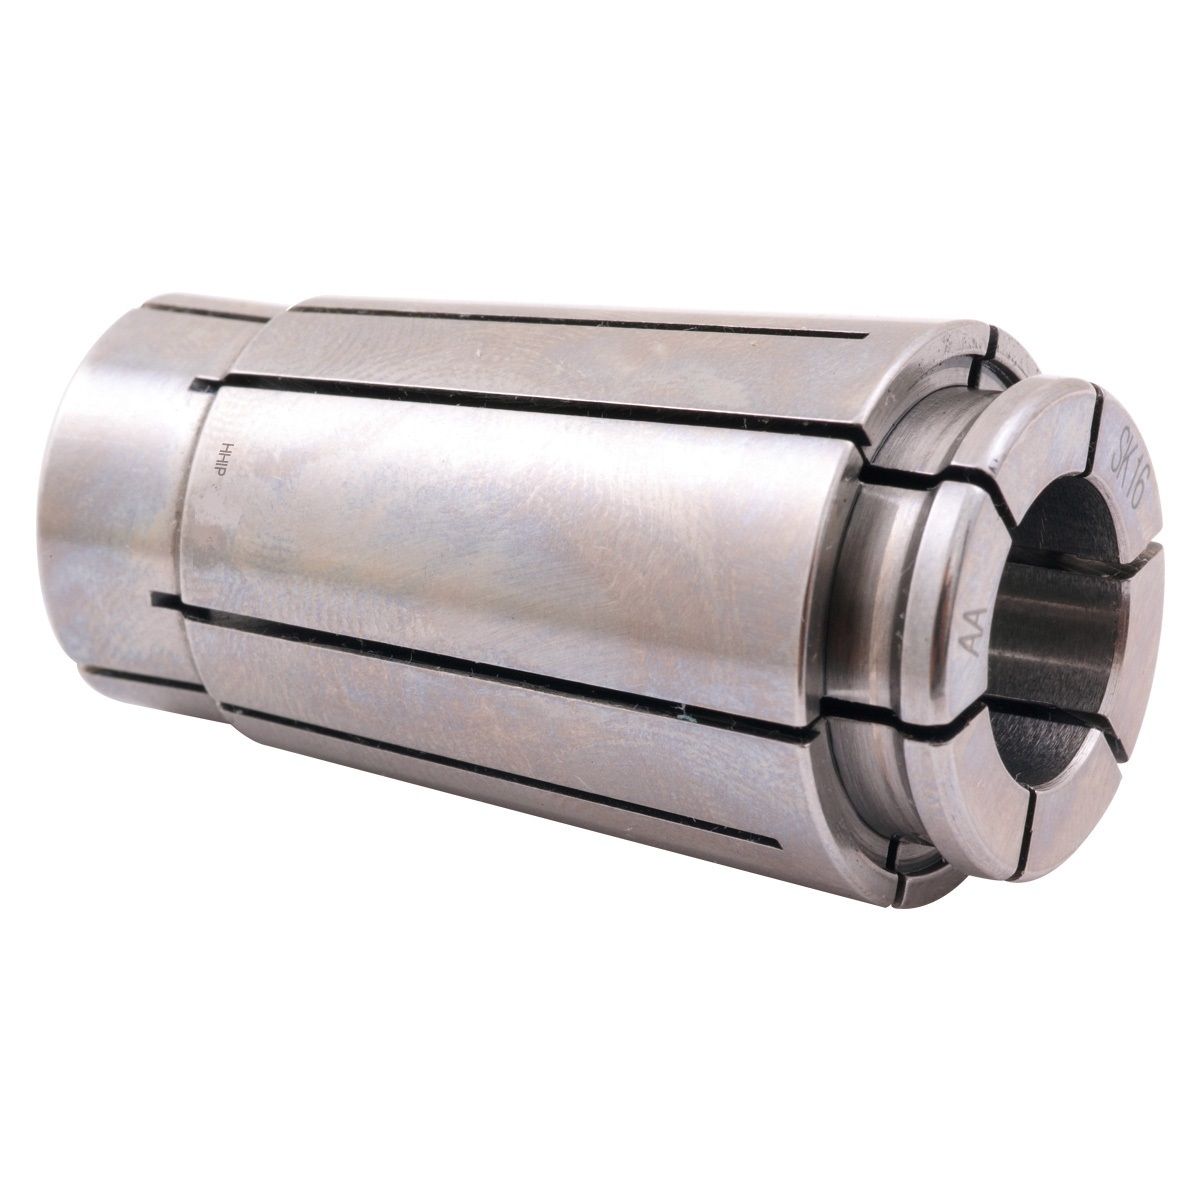 PRO-SERIES 7/16" SK16 LYNDEX STYLE COLLET (3901-5452)